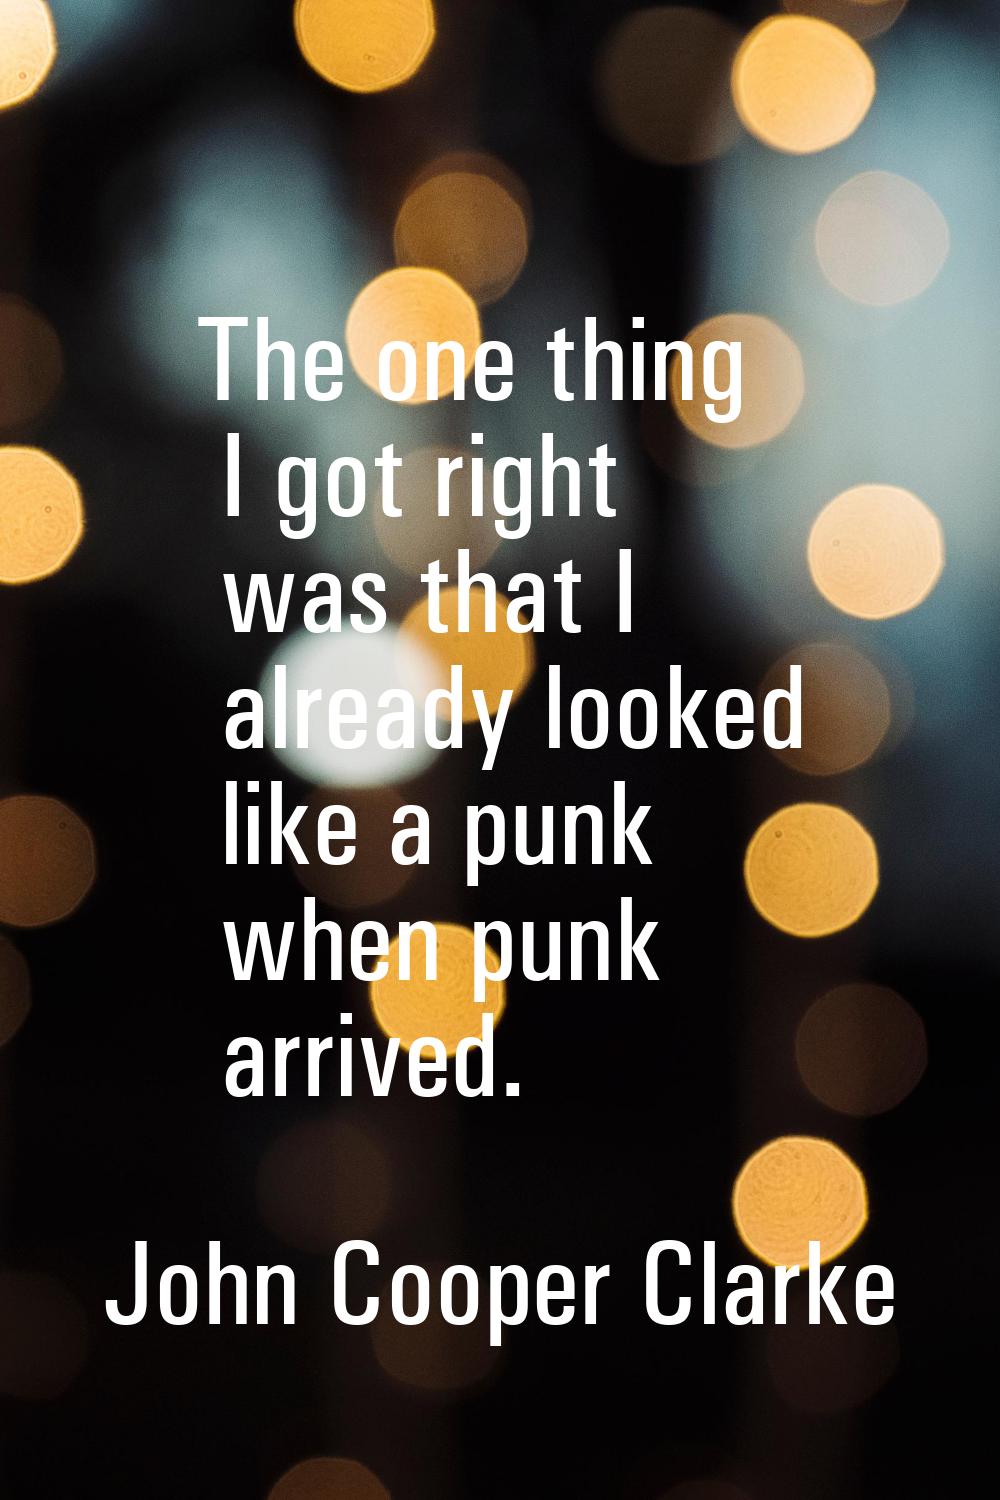 The one thing I got right was that I already looked like a punk when punk arrived.